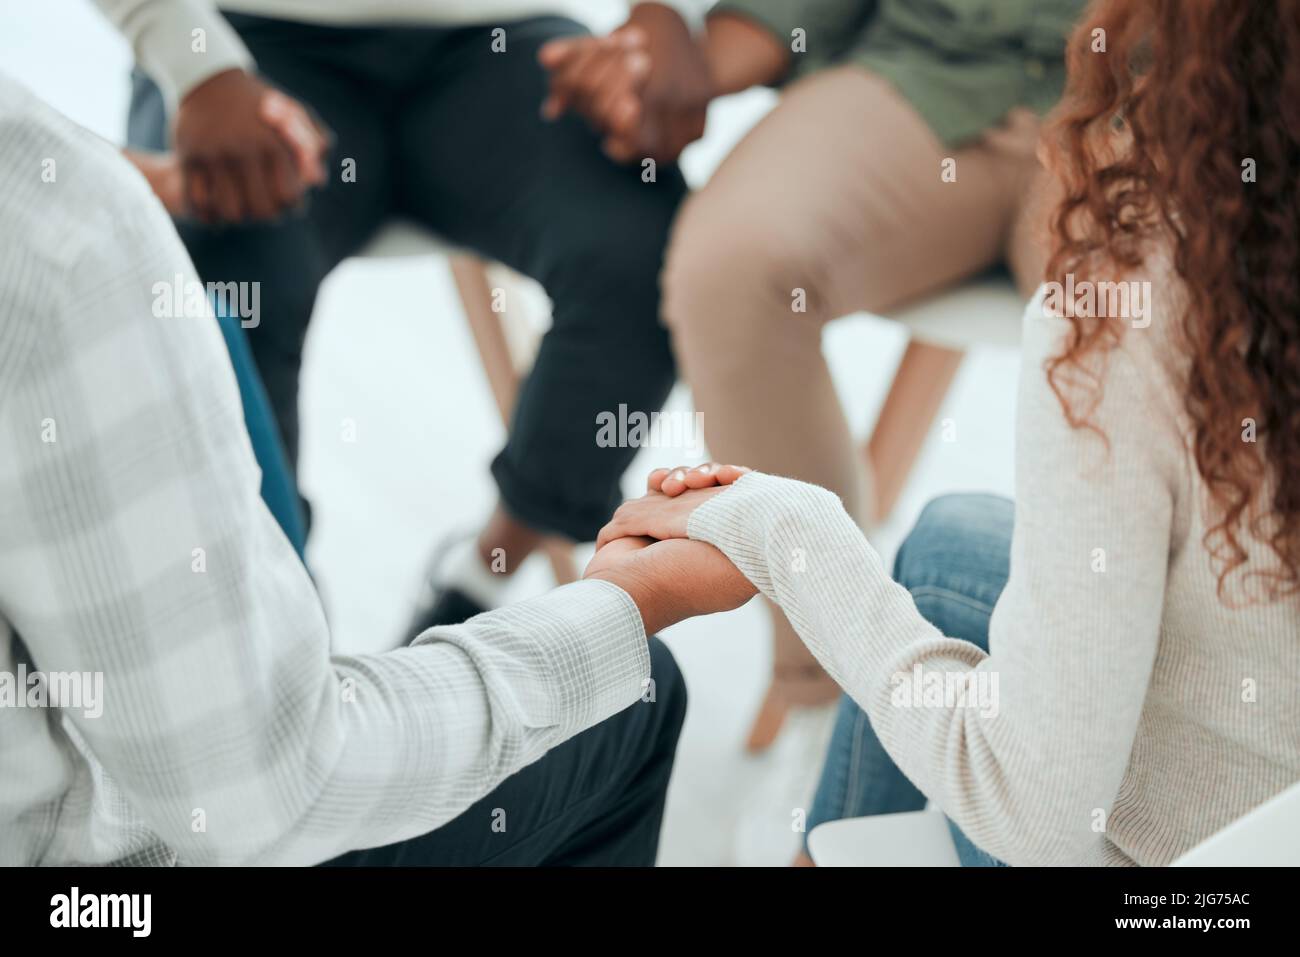 Offering up our prayers. Cropped shot of an unrecognisable group of people sitting together and holding hands during prayer. Stock Photo